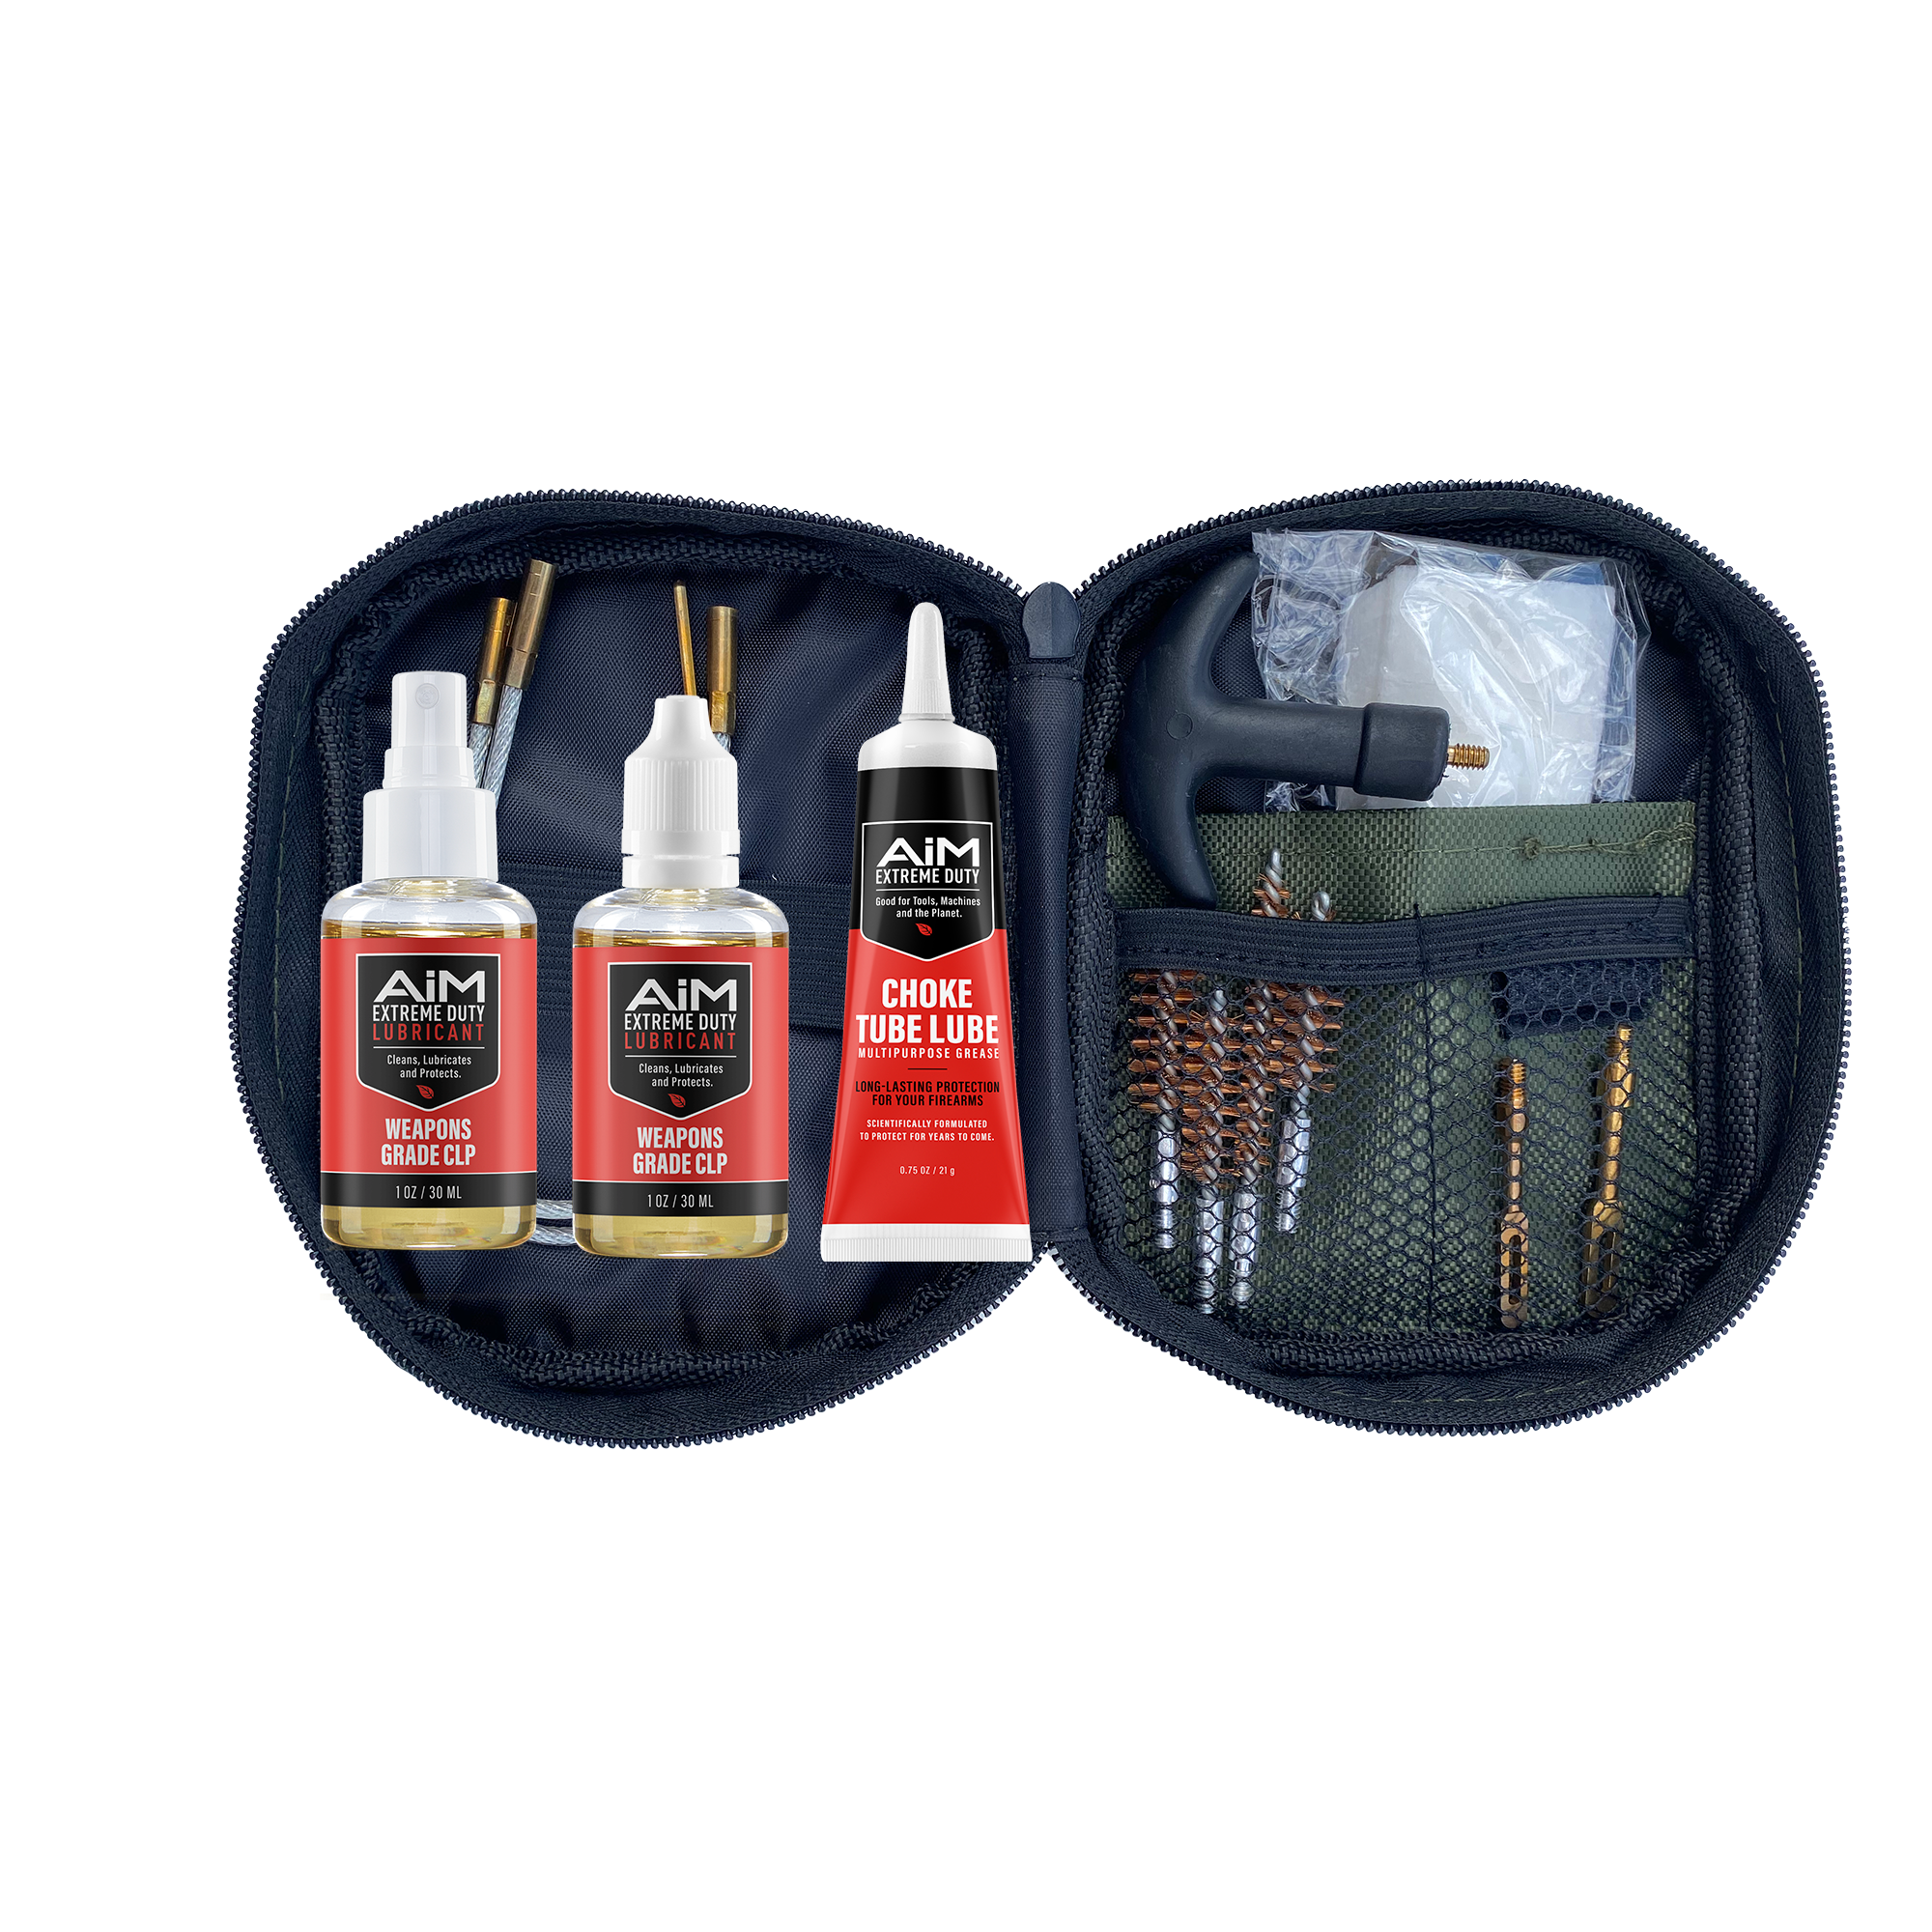 AIM Weapons Grade CLP Pistol Cleaning Kit